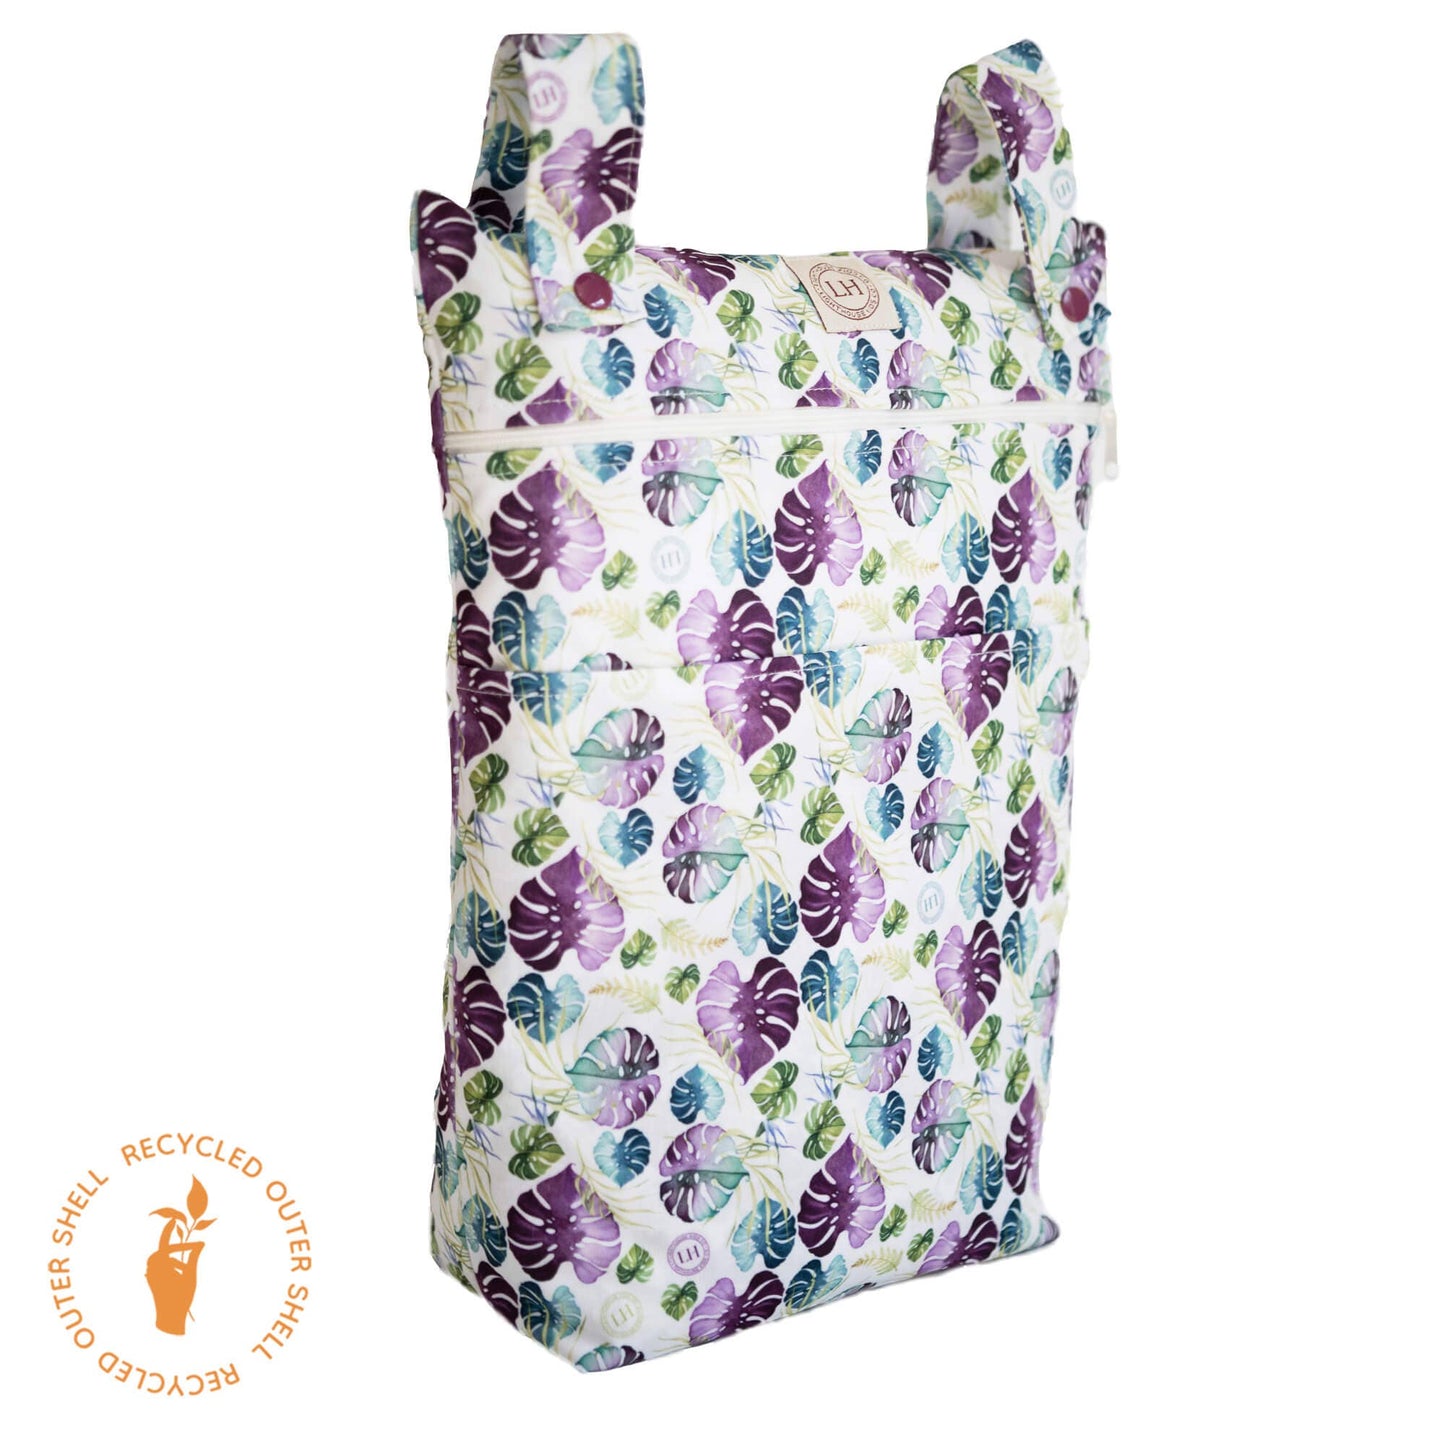 Lighthouse Kids Company | Cloth Diapers | Cloth Nappy - Medium Wet Bag - Two Pocket - Leaves